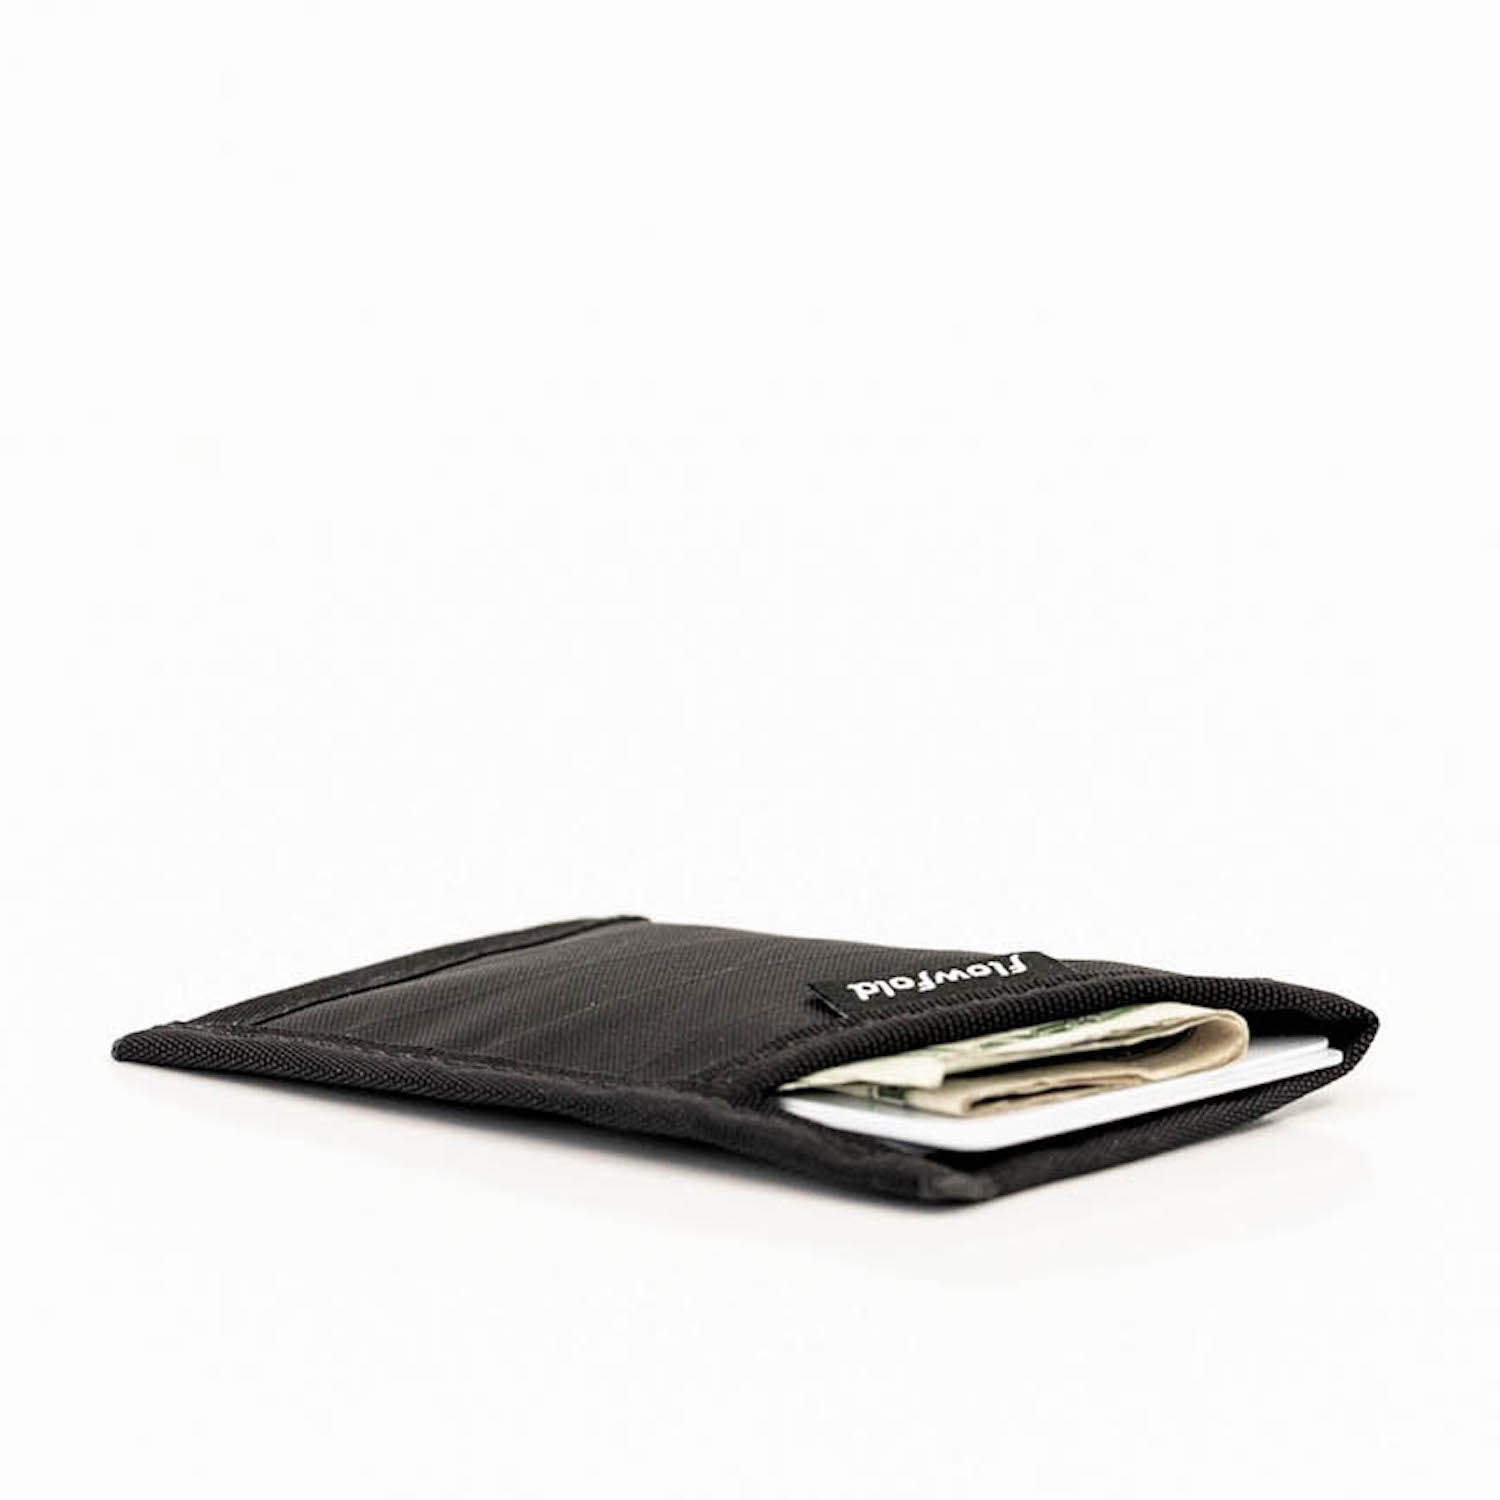 Flowfold Minimalist Card Holder Wallet Recycled Wallet of 100% Recycled Polyester EcoPak Jet Black